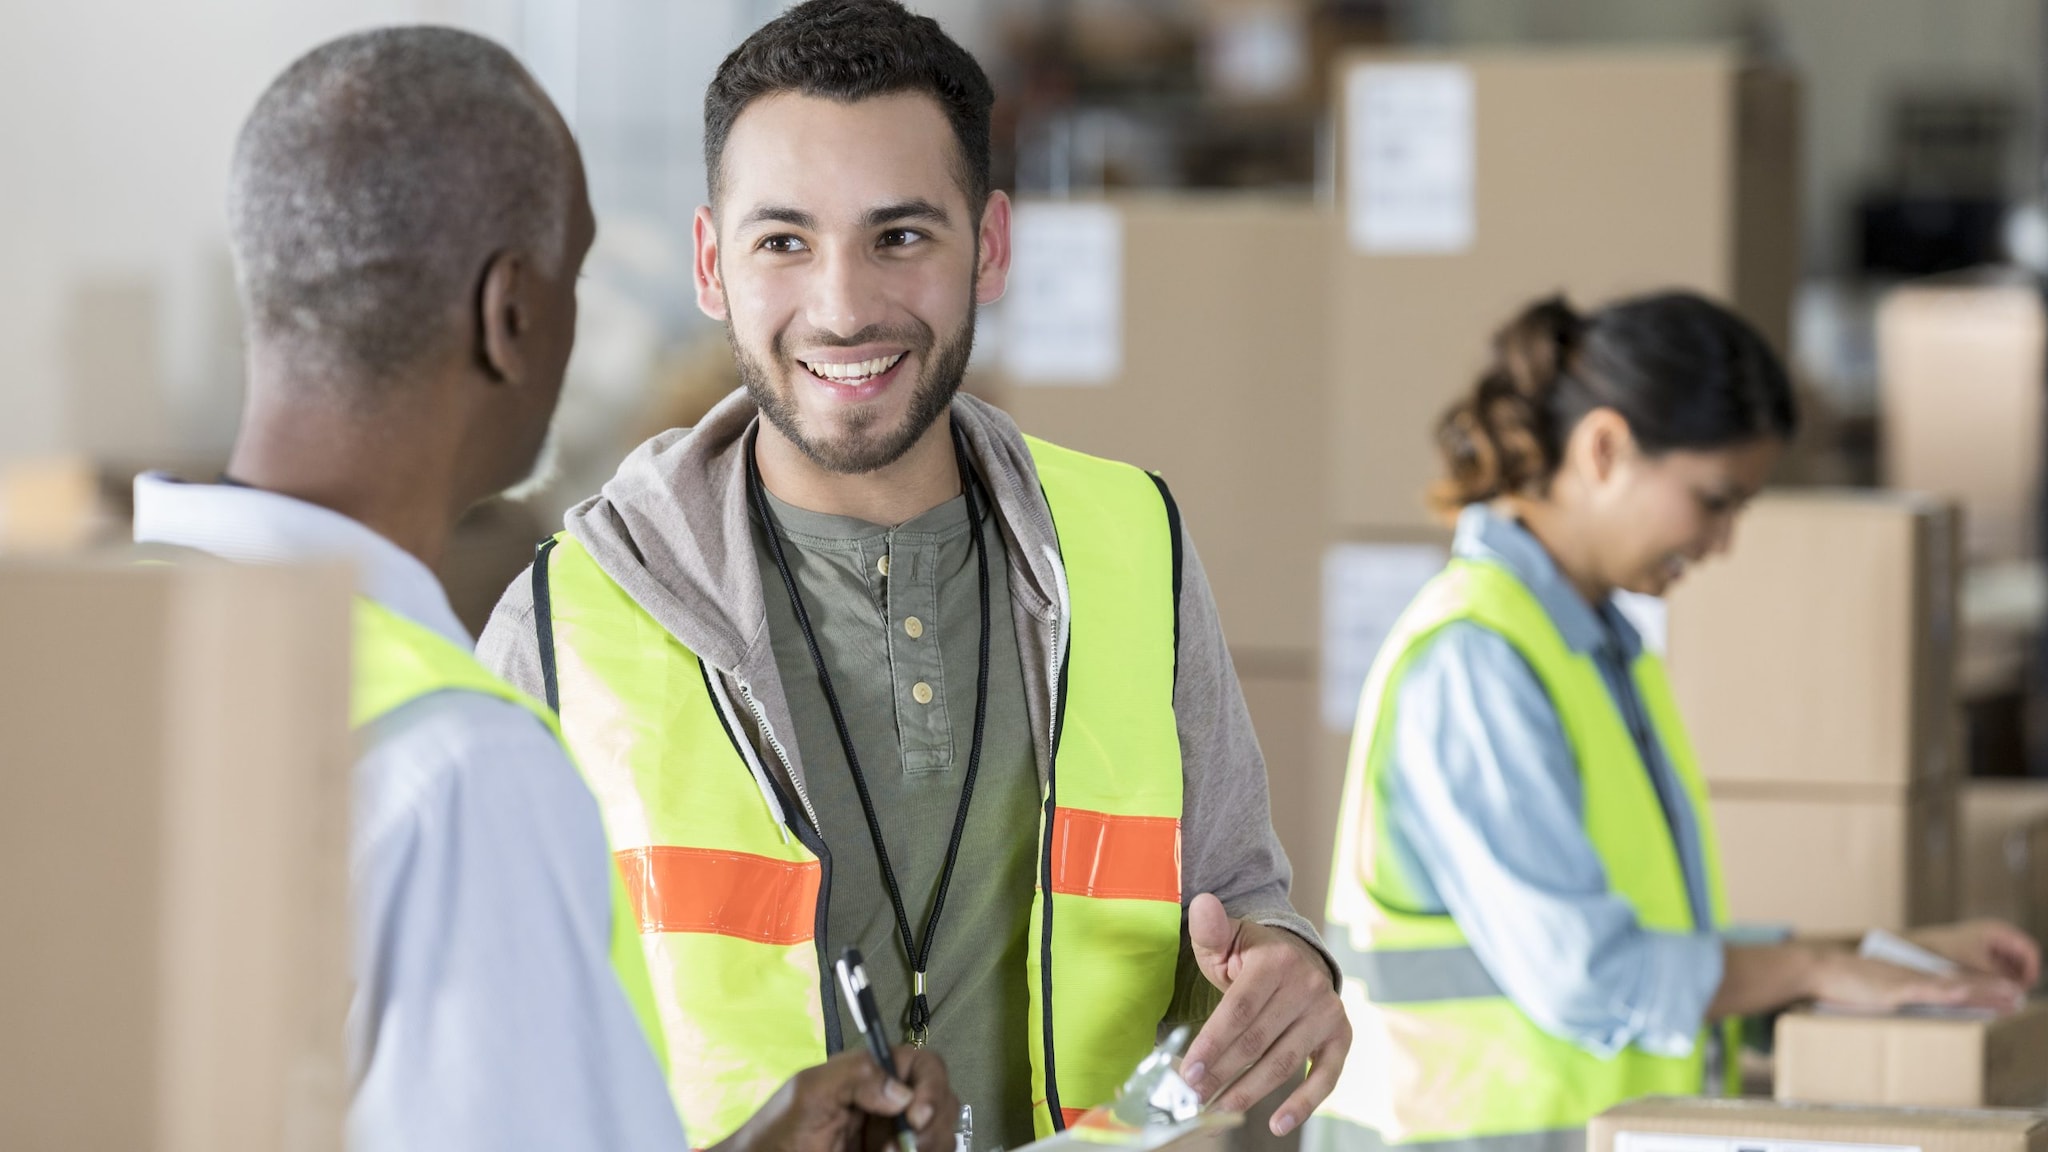 Three warehouse workers wearing yellow safety vests. In the background, a worker affixes a label to a box. In the foreground, a worker is talking to his manager.